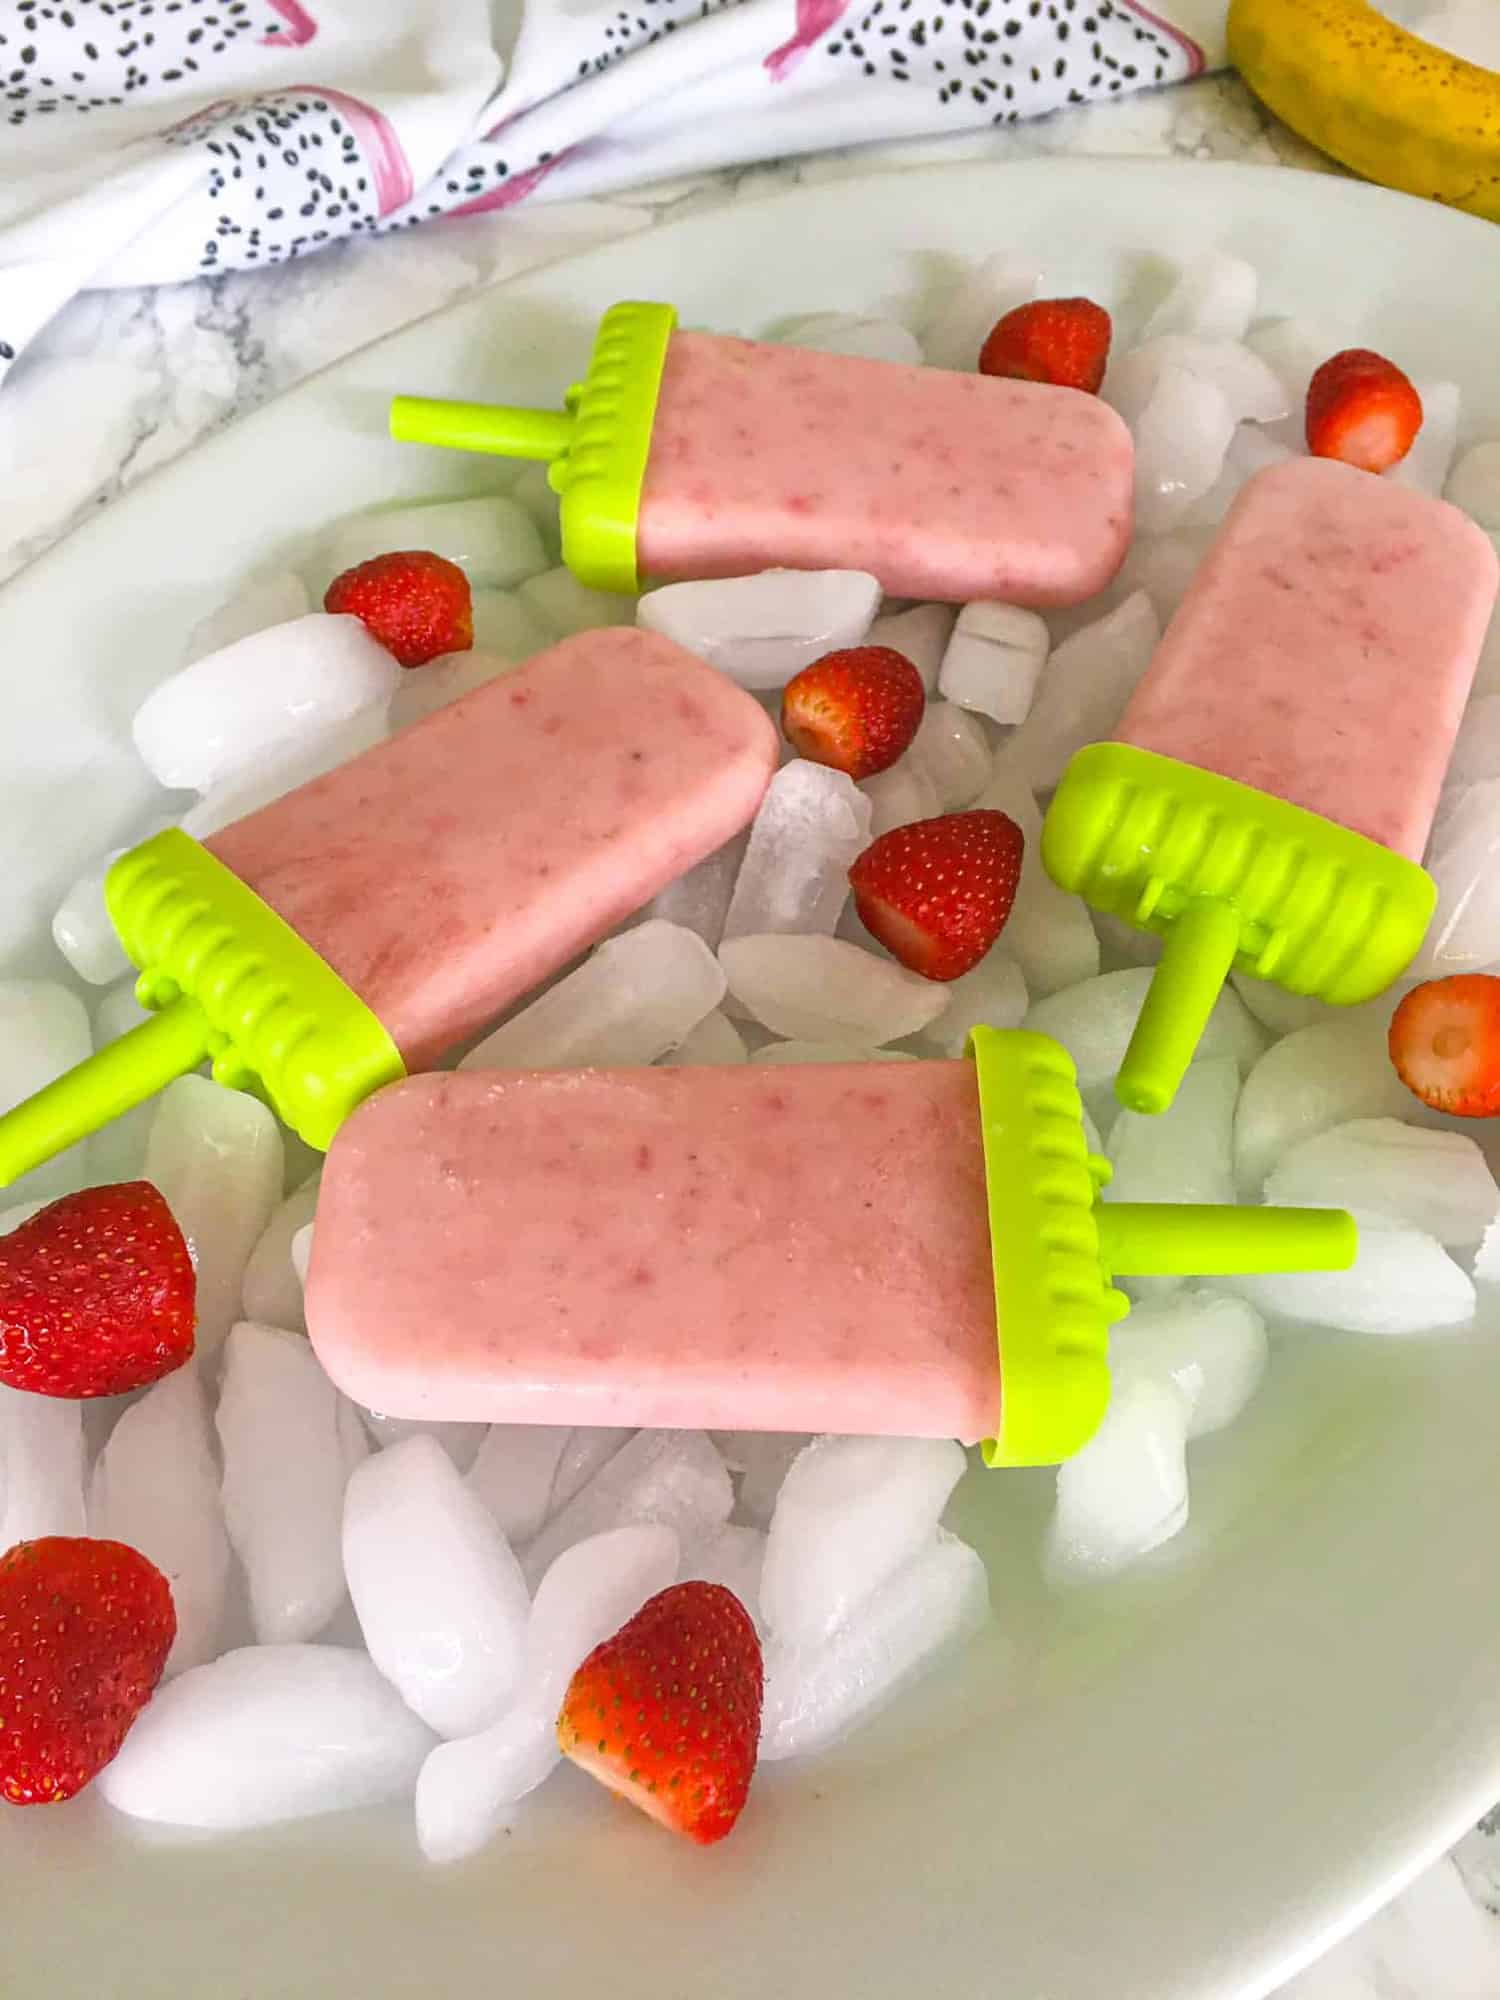 Strawberry Banana Popsicles in large tray of ice cubes